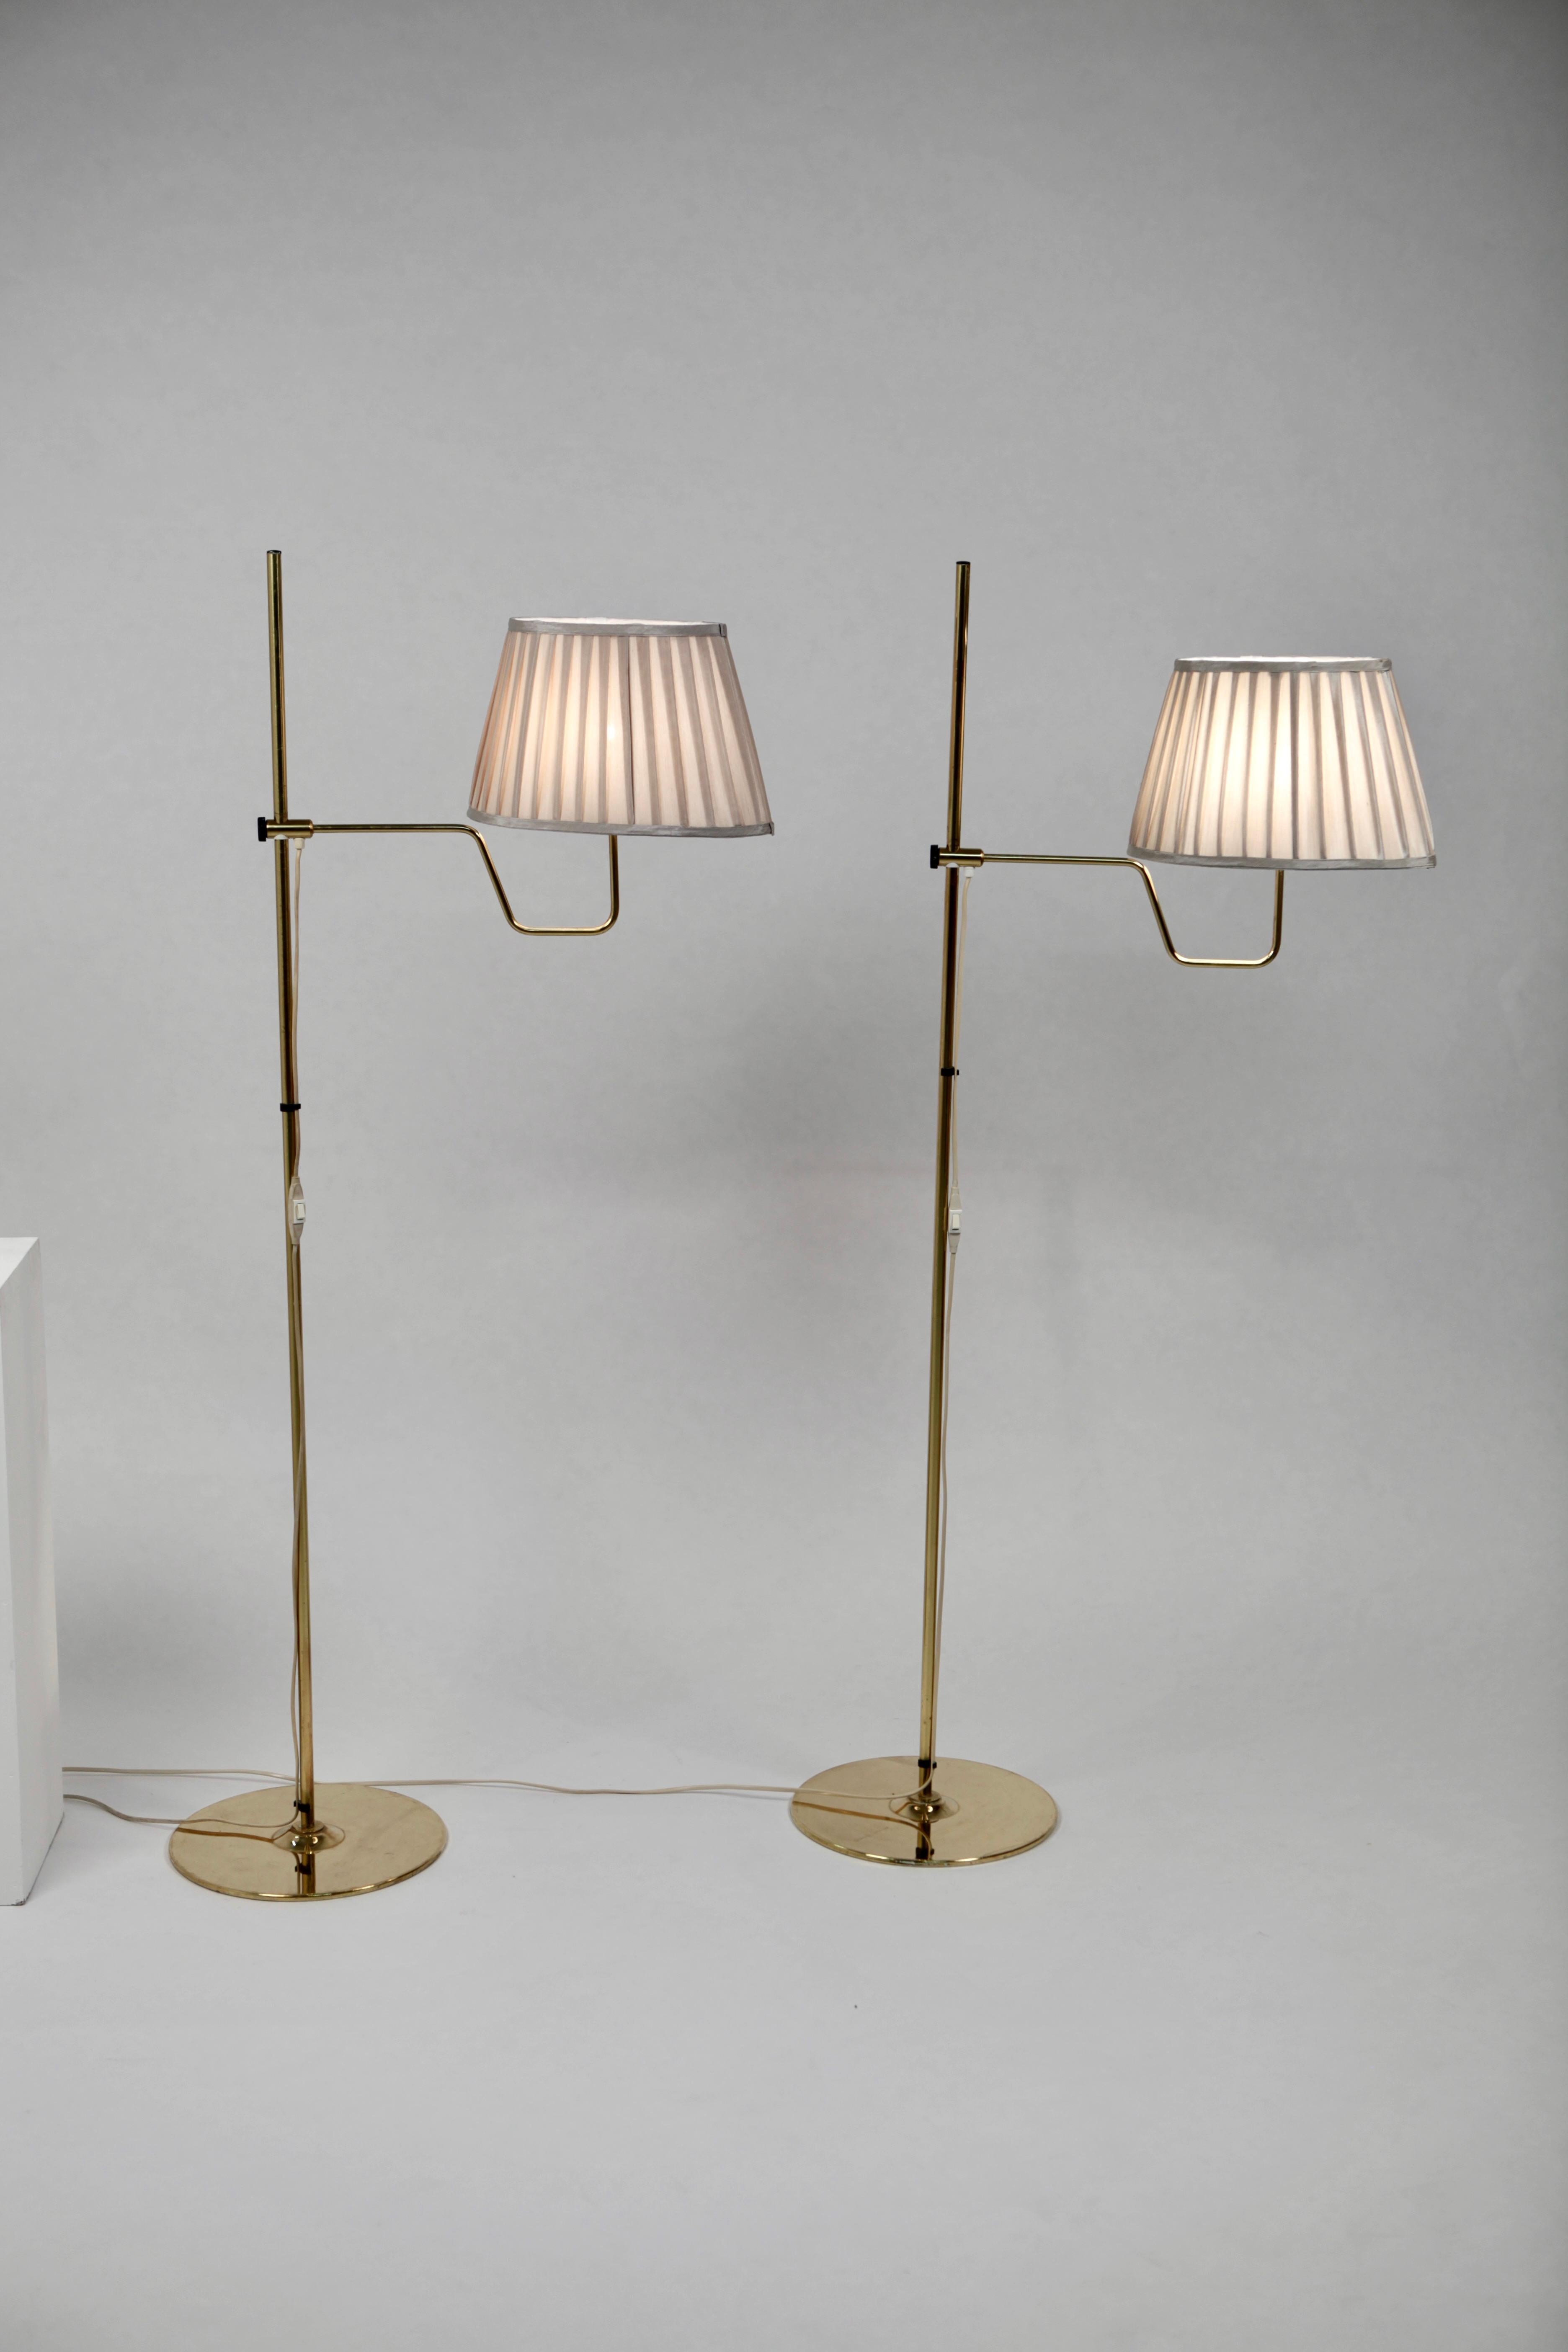 A pair of rare floor lamps, model G-192 M, designed by Hans-Agne Jakobsson & manufactured by H-AJ AB in Markaryd, Sweden in the 1950s.
Good vintage condition.